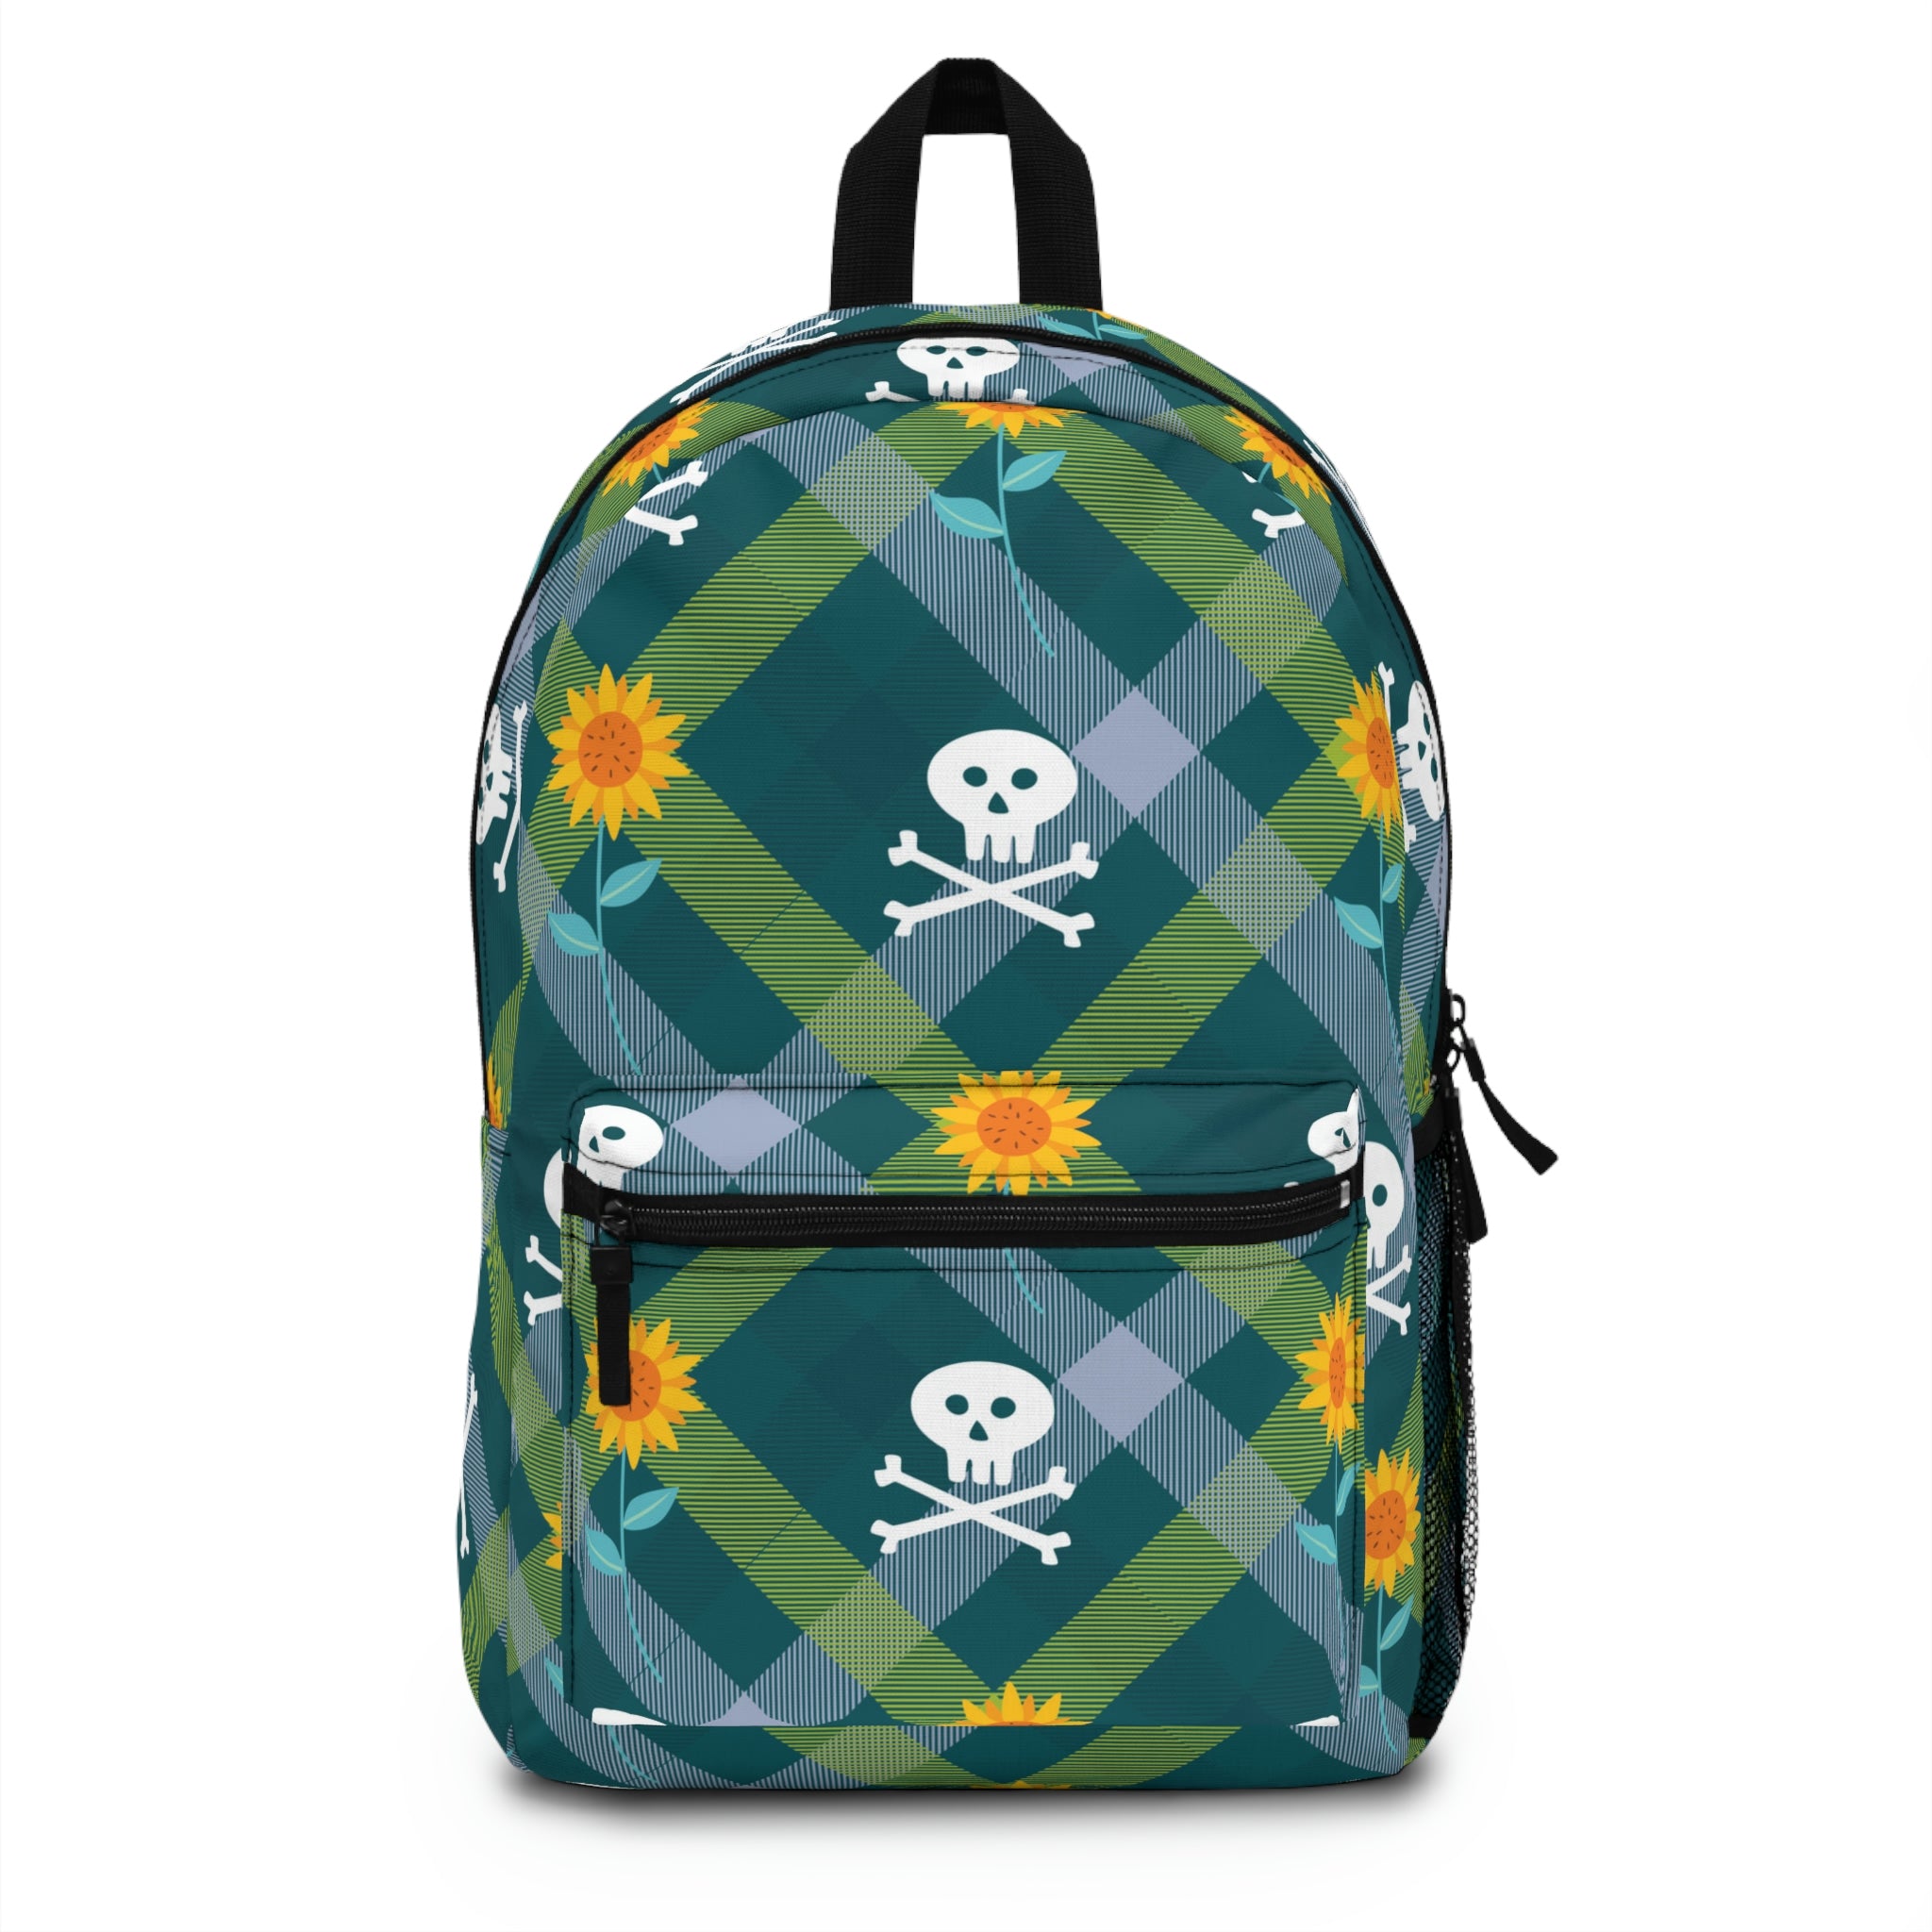 "Pirates & Sunflowers" Plaid Backpack